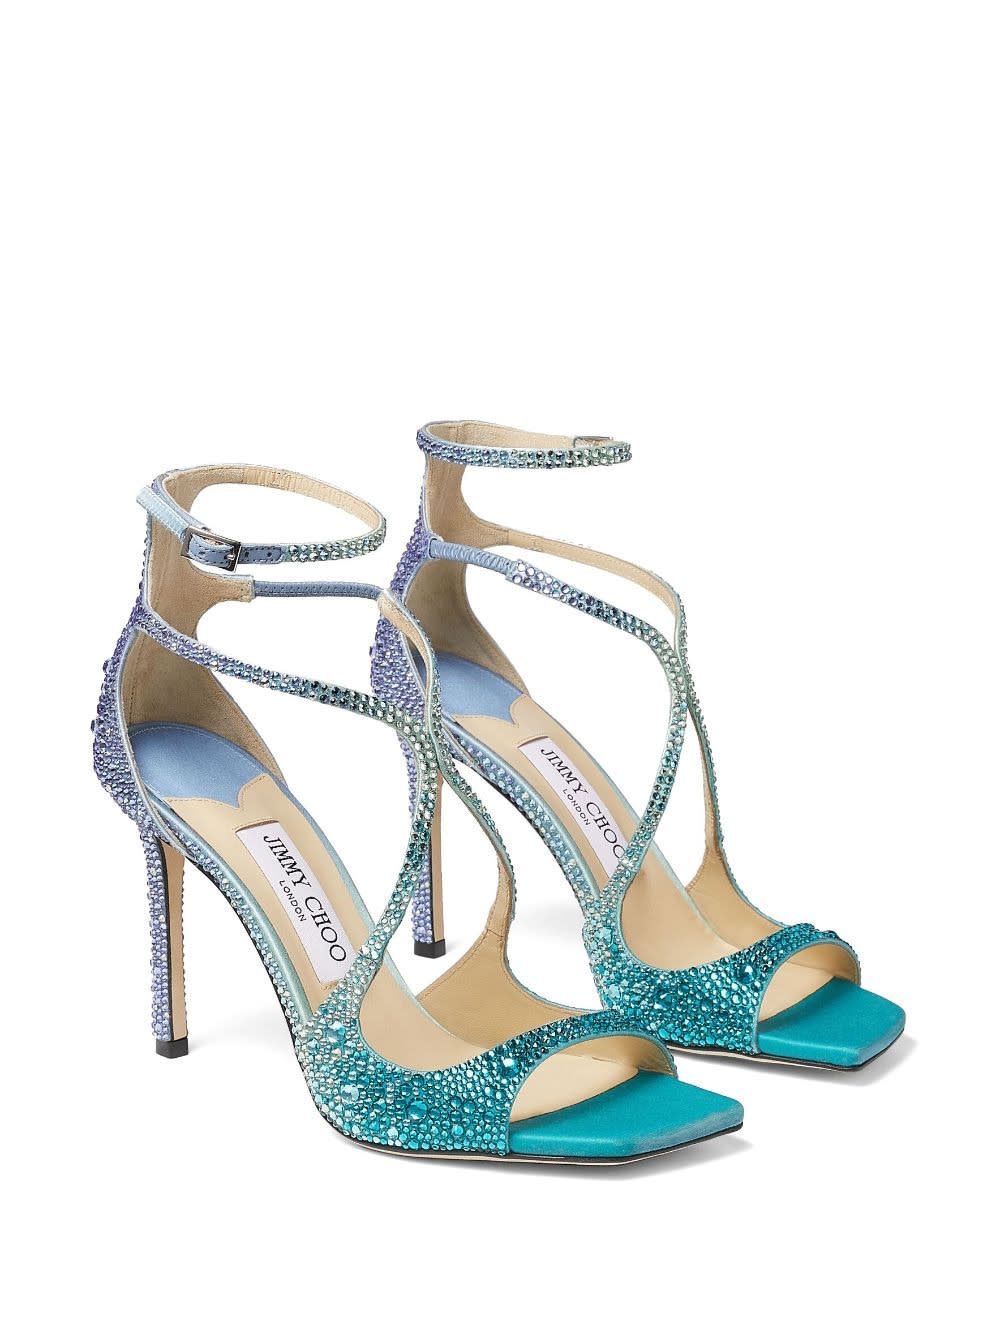 Shop Jimmy Choo Azia 95 Sandal In Blue Peacock With Crystals